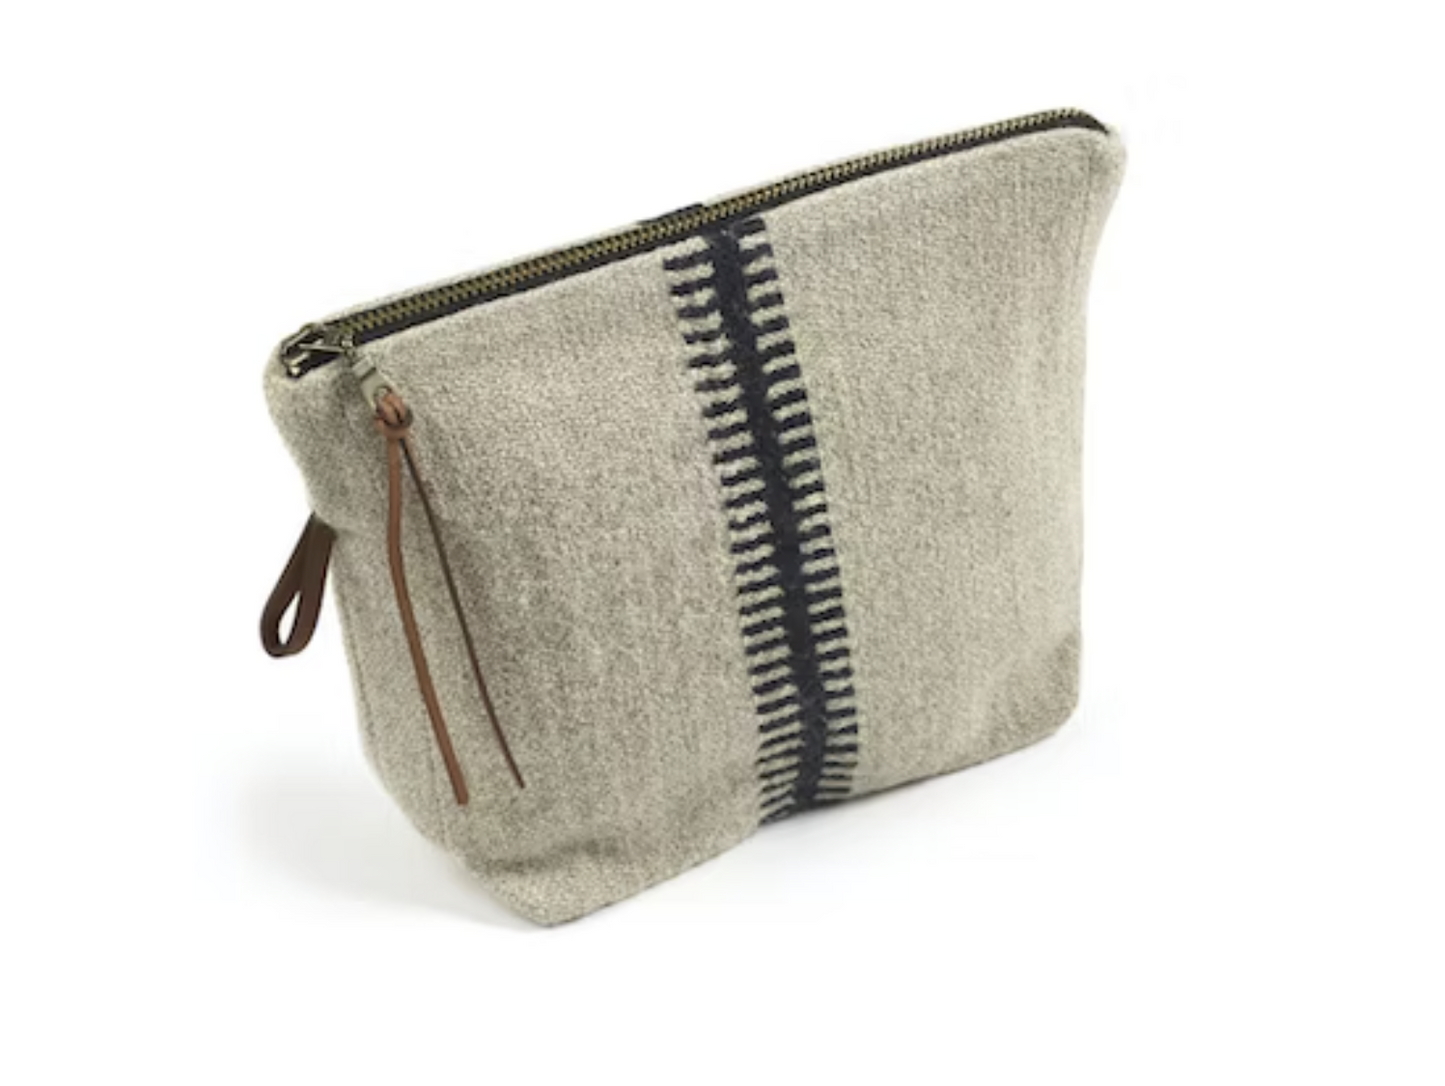 MARSHALL POUCH - Small Stripe $68.00